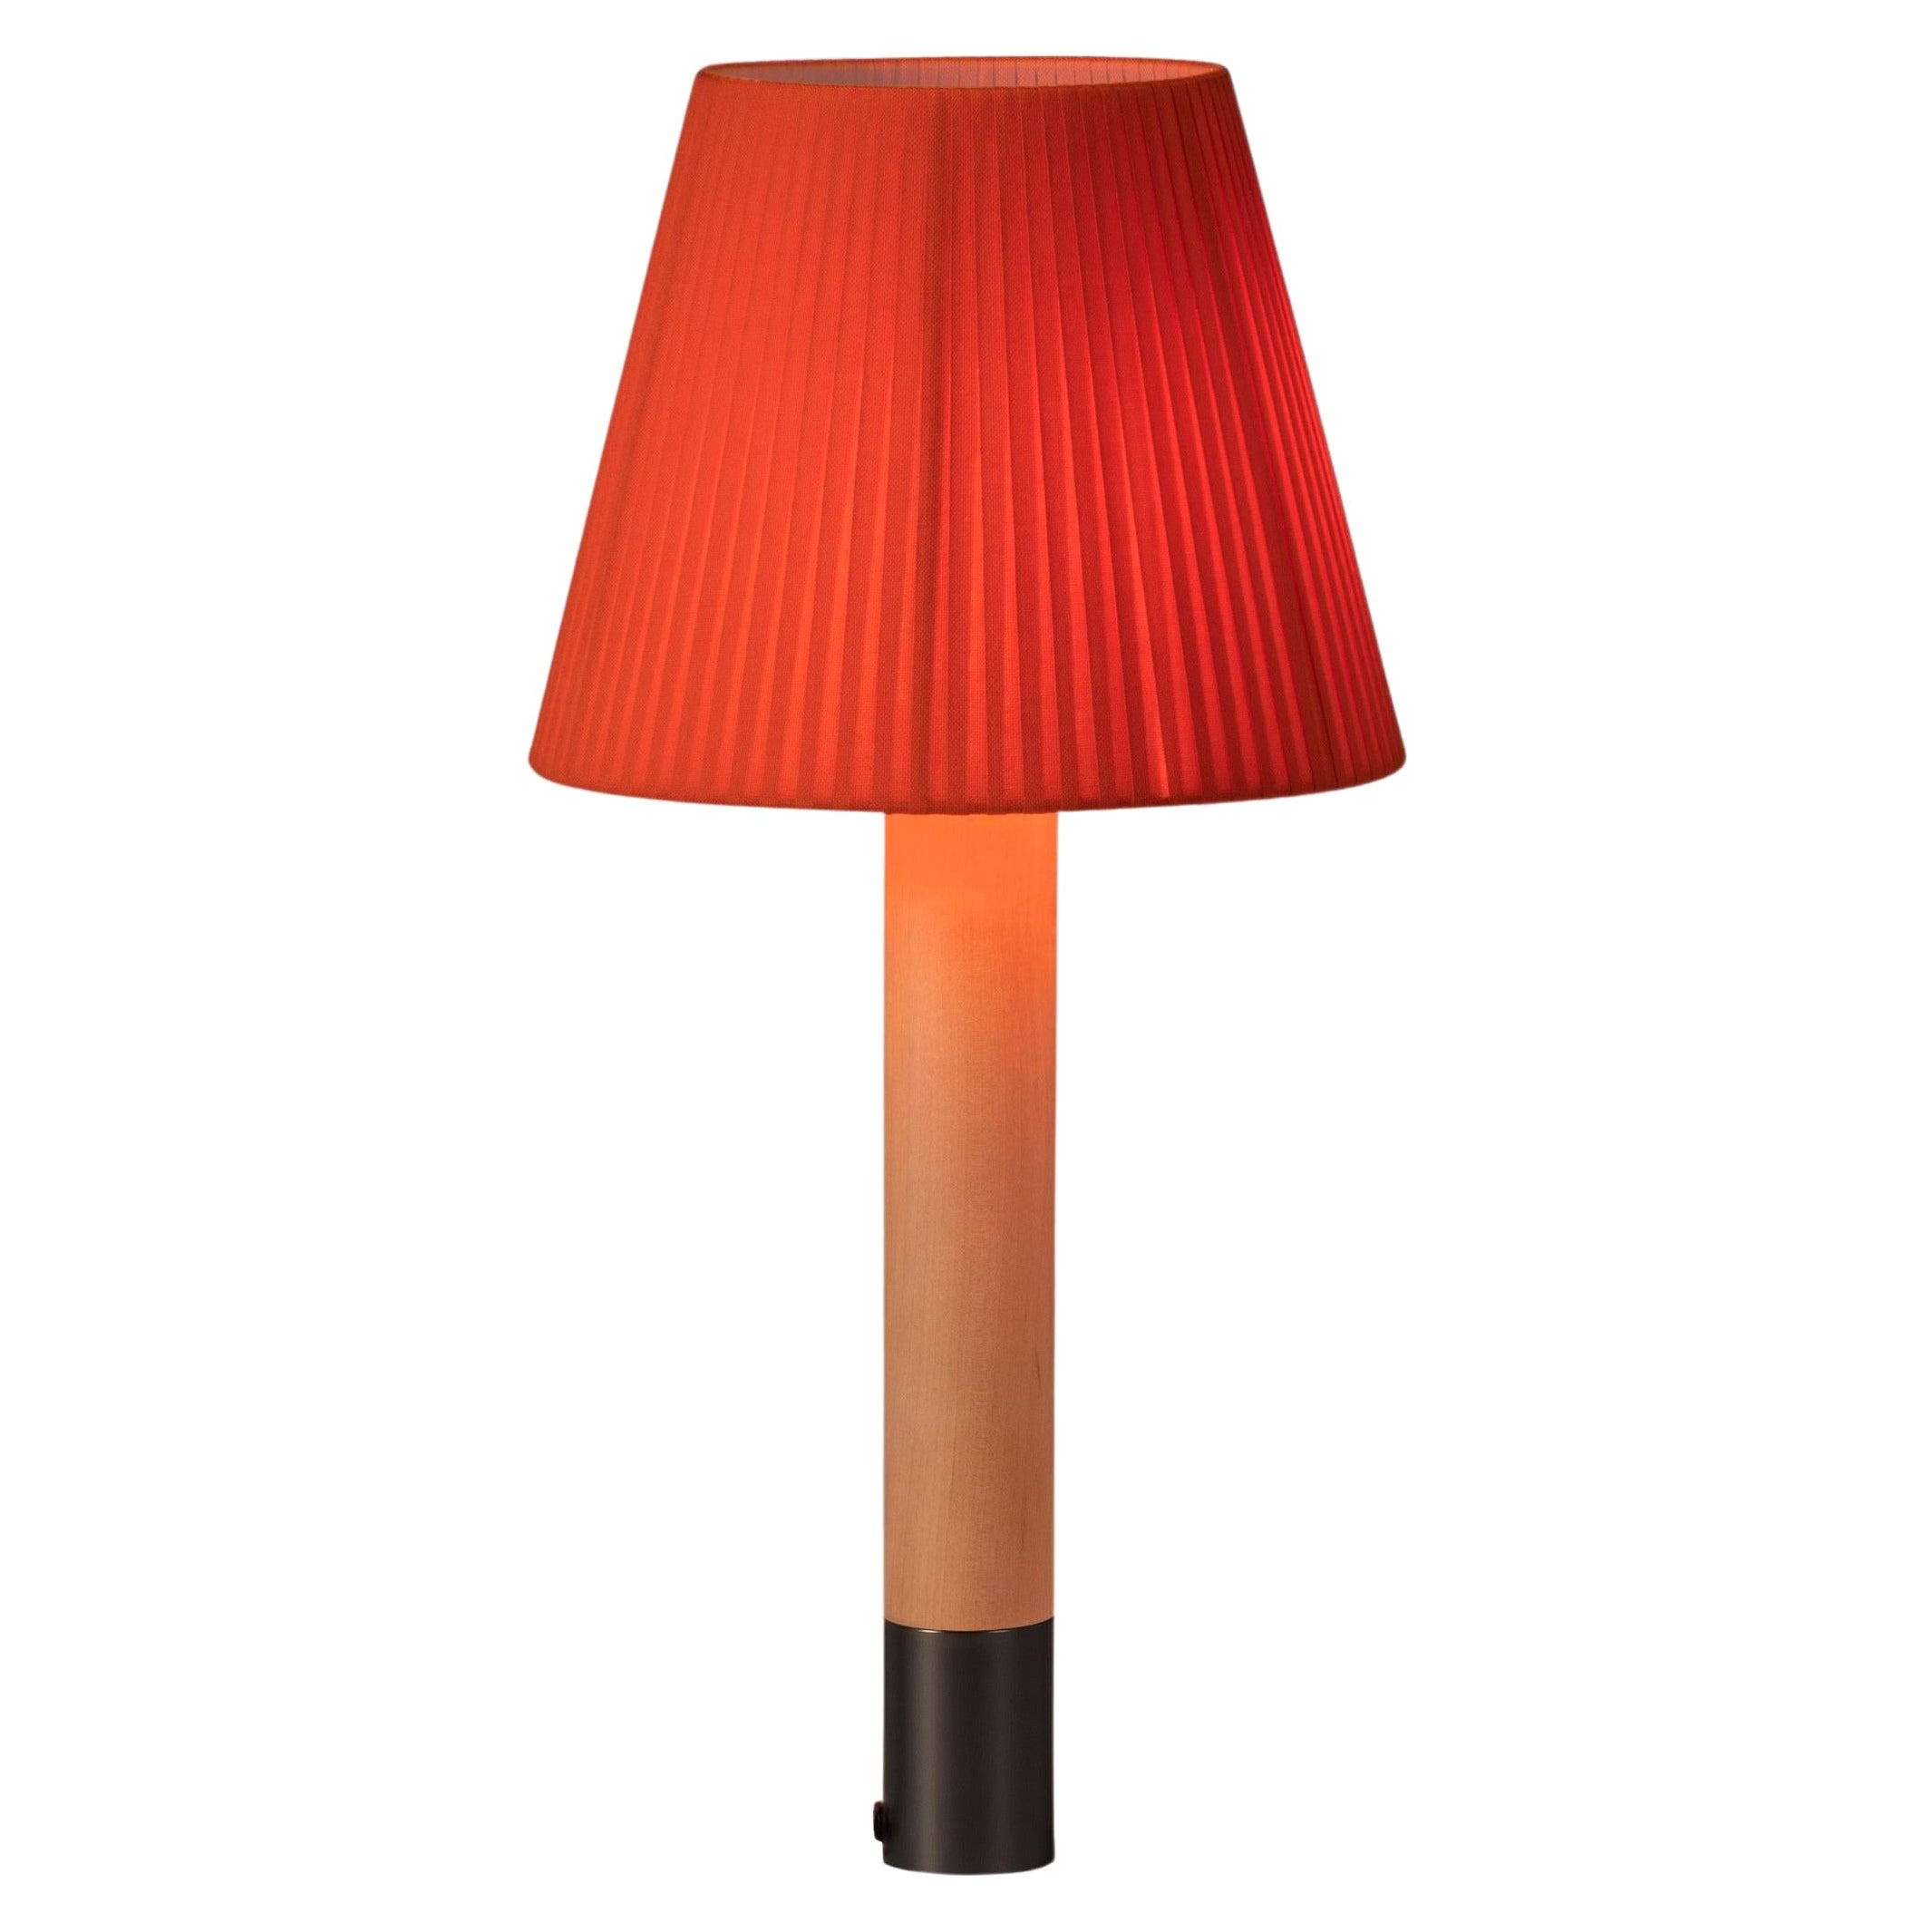 Bronze and Red Básica M1 Table Lamp by Santiago Roqueta, Santa & Cole For Sale